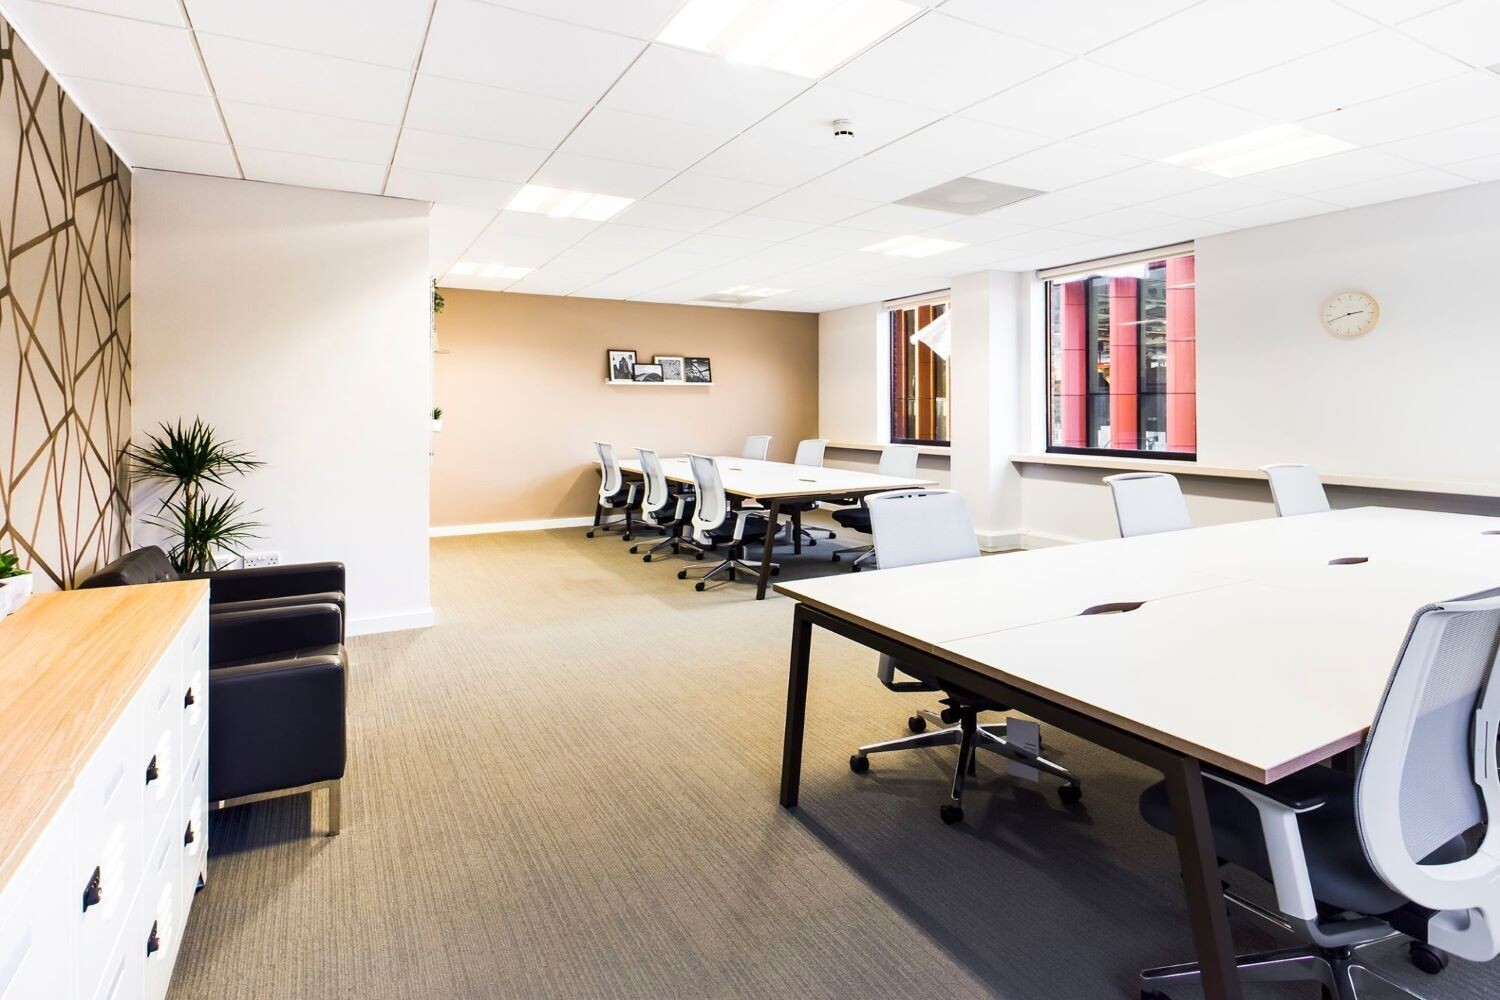 Offices and meeting rooms in Manchester